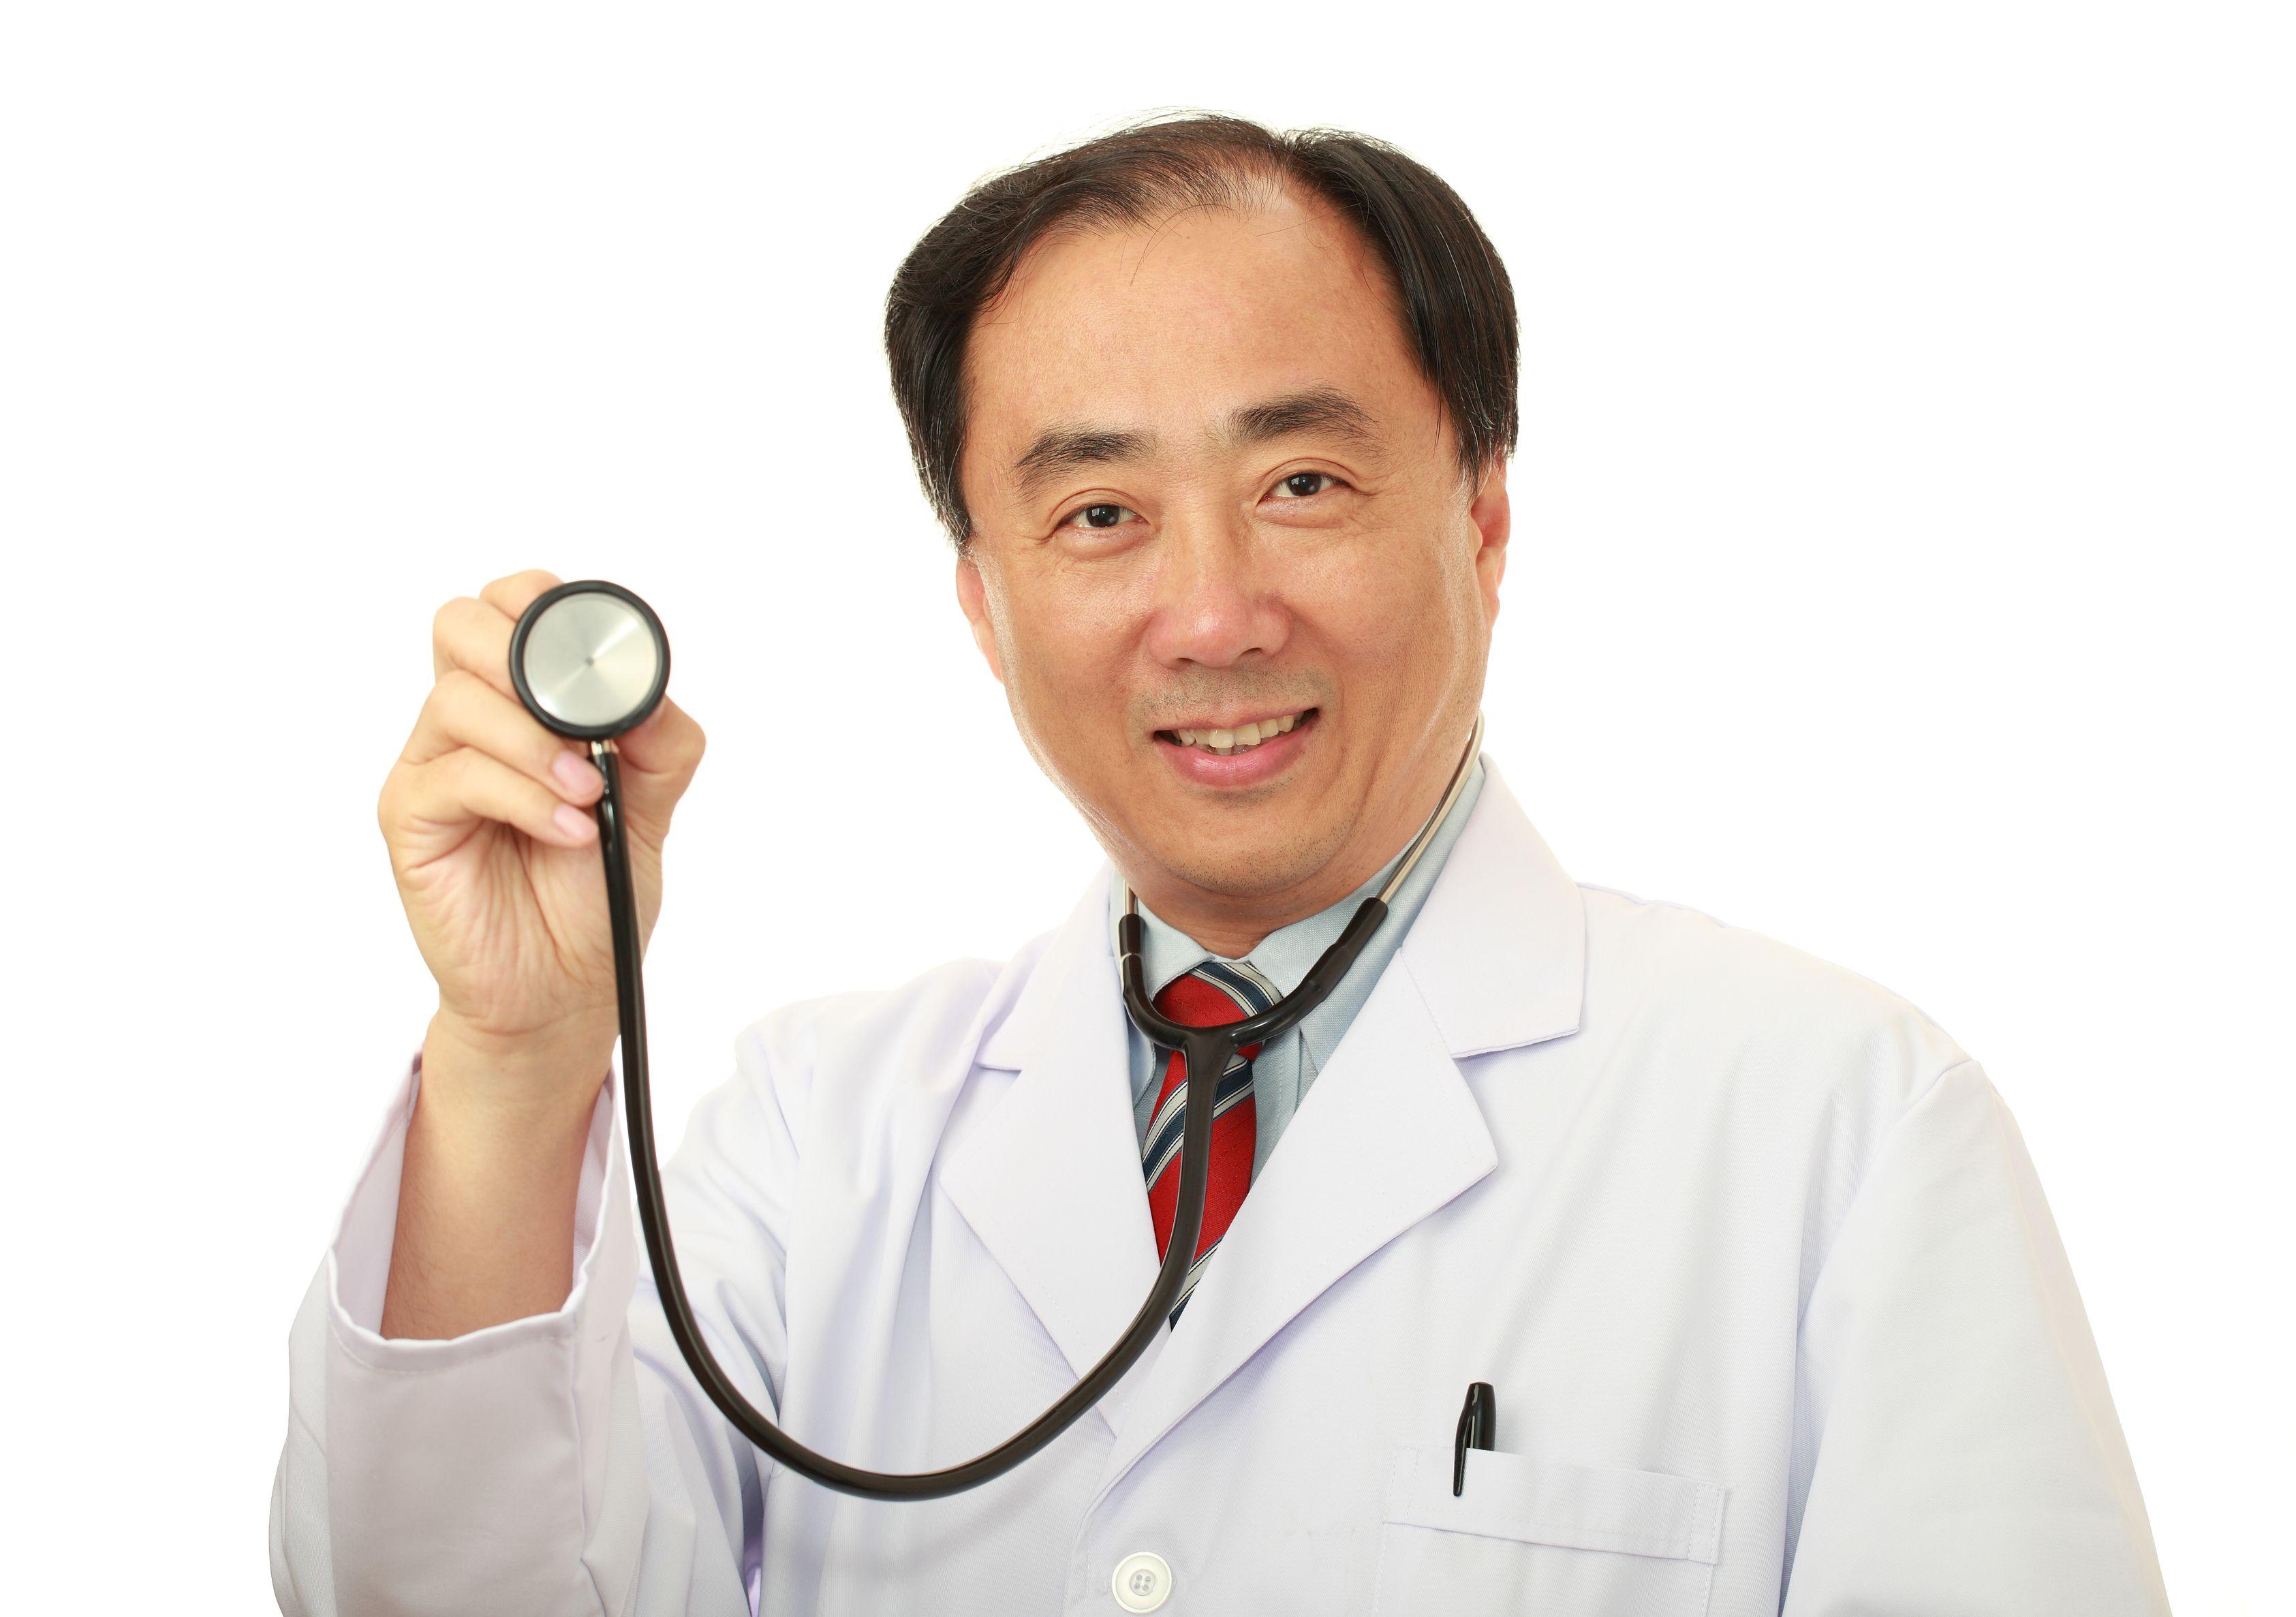 Doctor White Background Image. All White Background